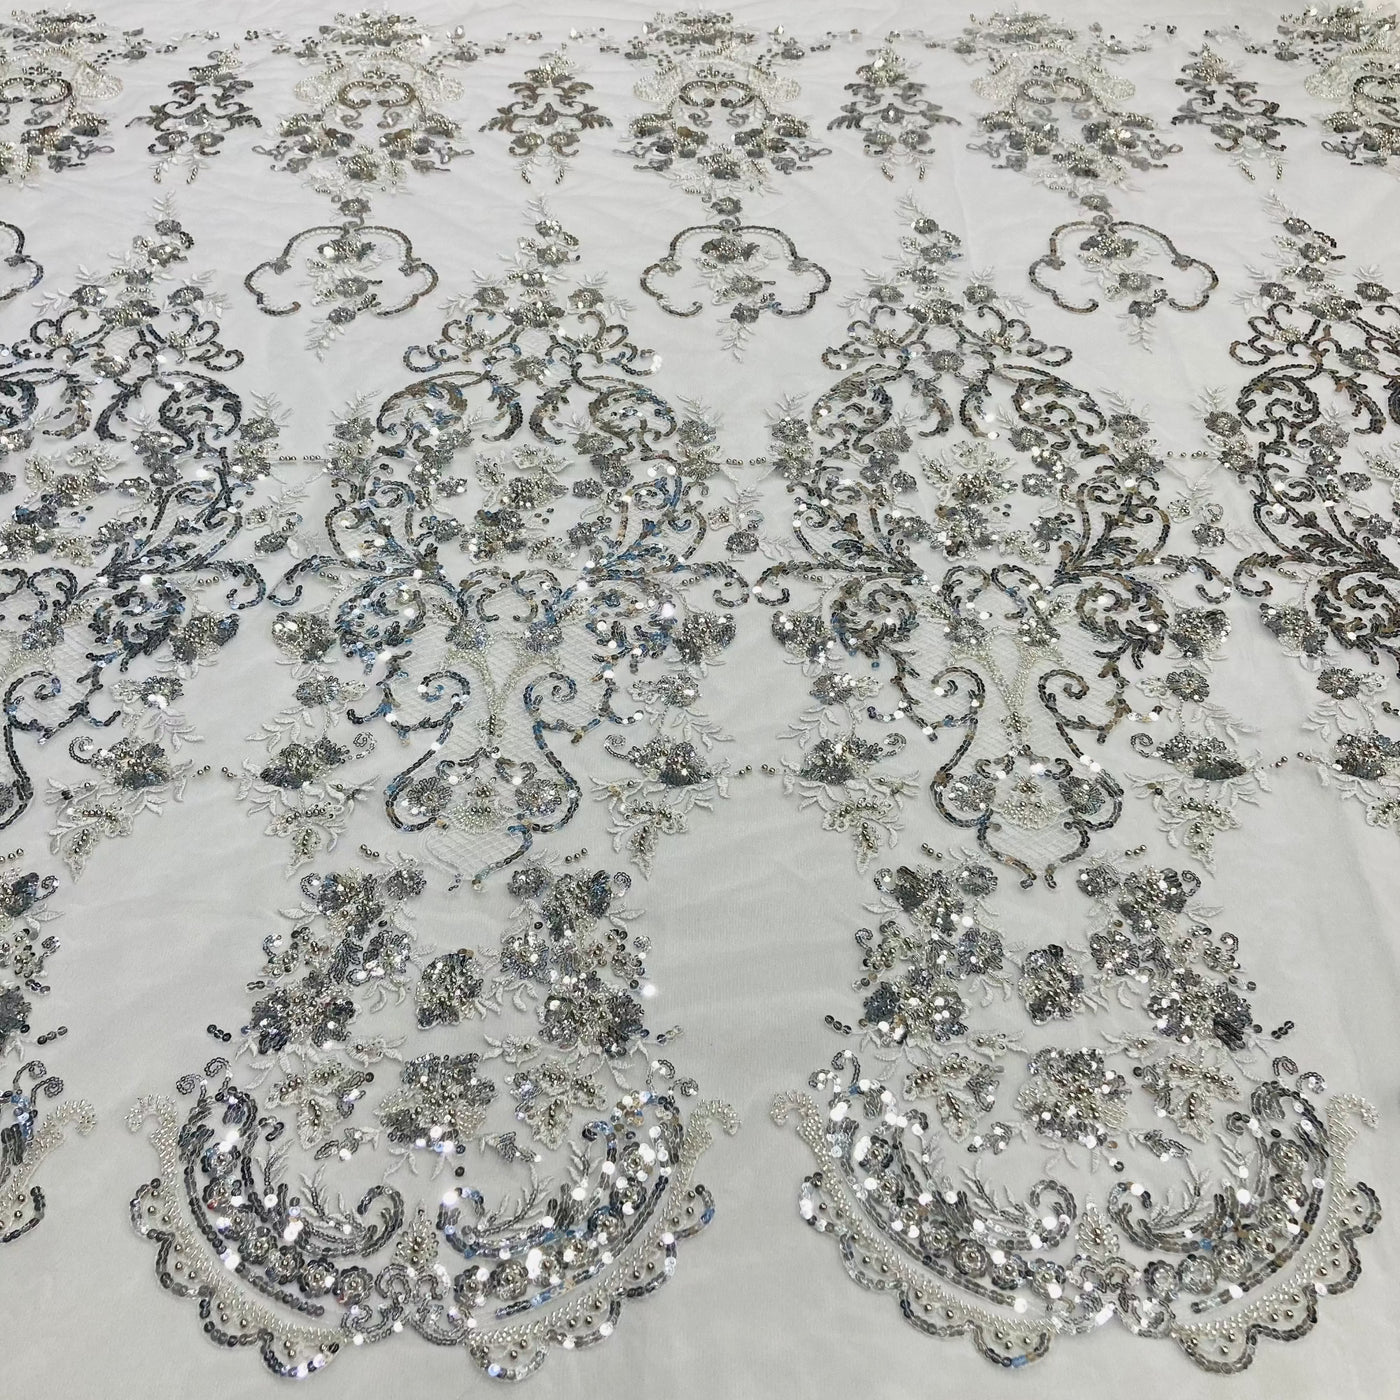 Beaded Lace Fabric Embroidered on 100% Polyester Net Mesh | Lace USA - GD-210907 Silver